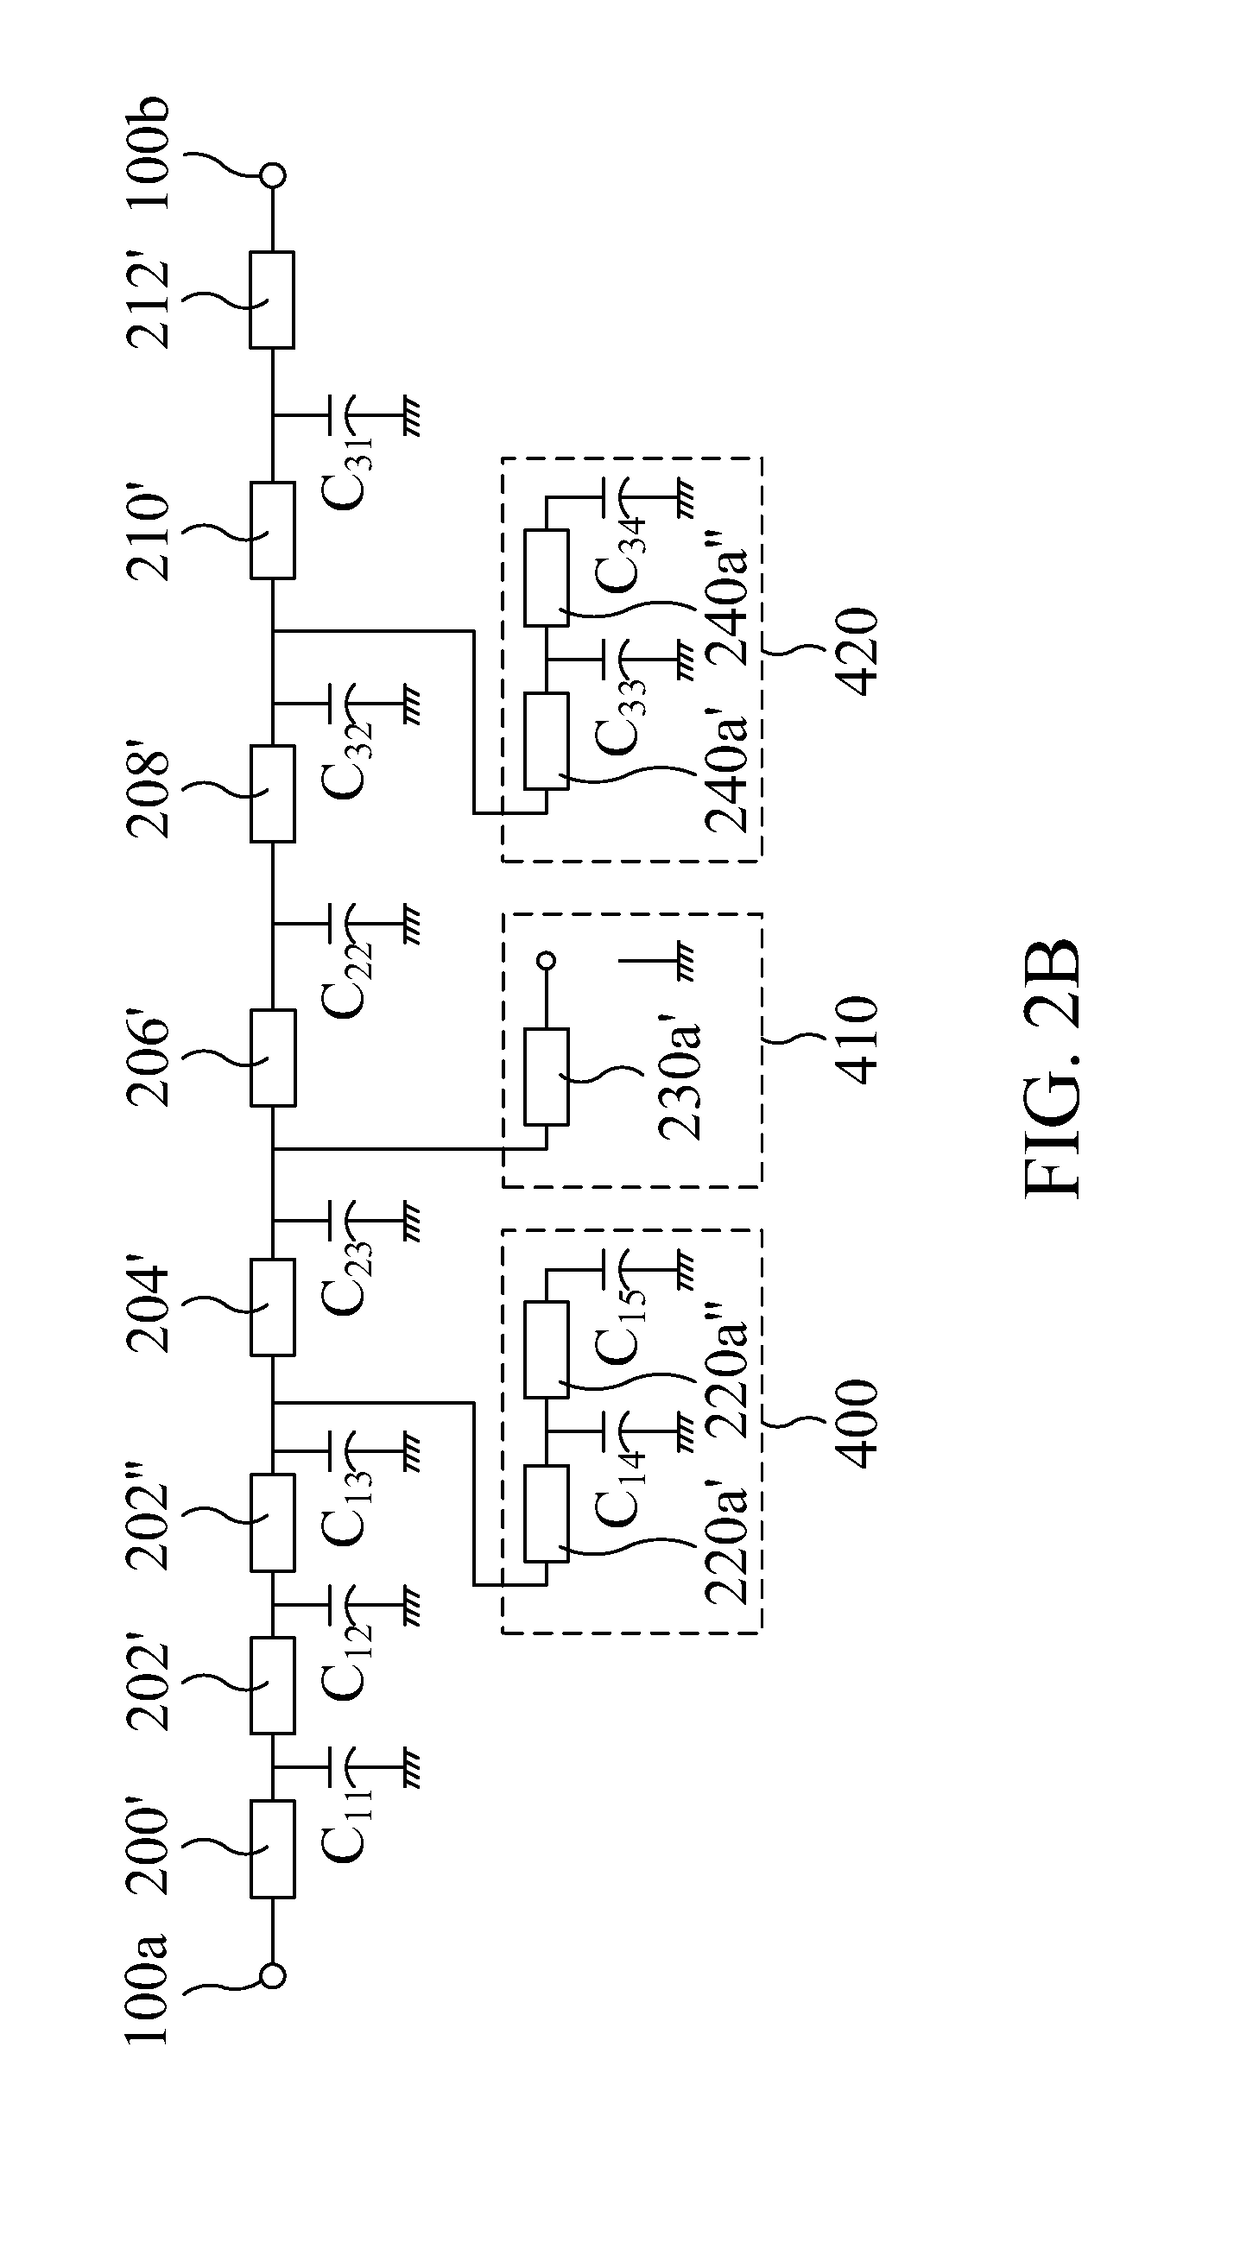 Impedance matching structure of transmission line in multilayer circuit board